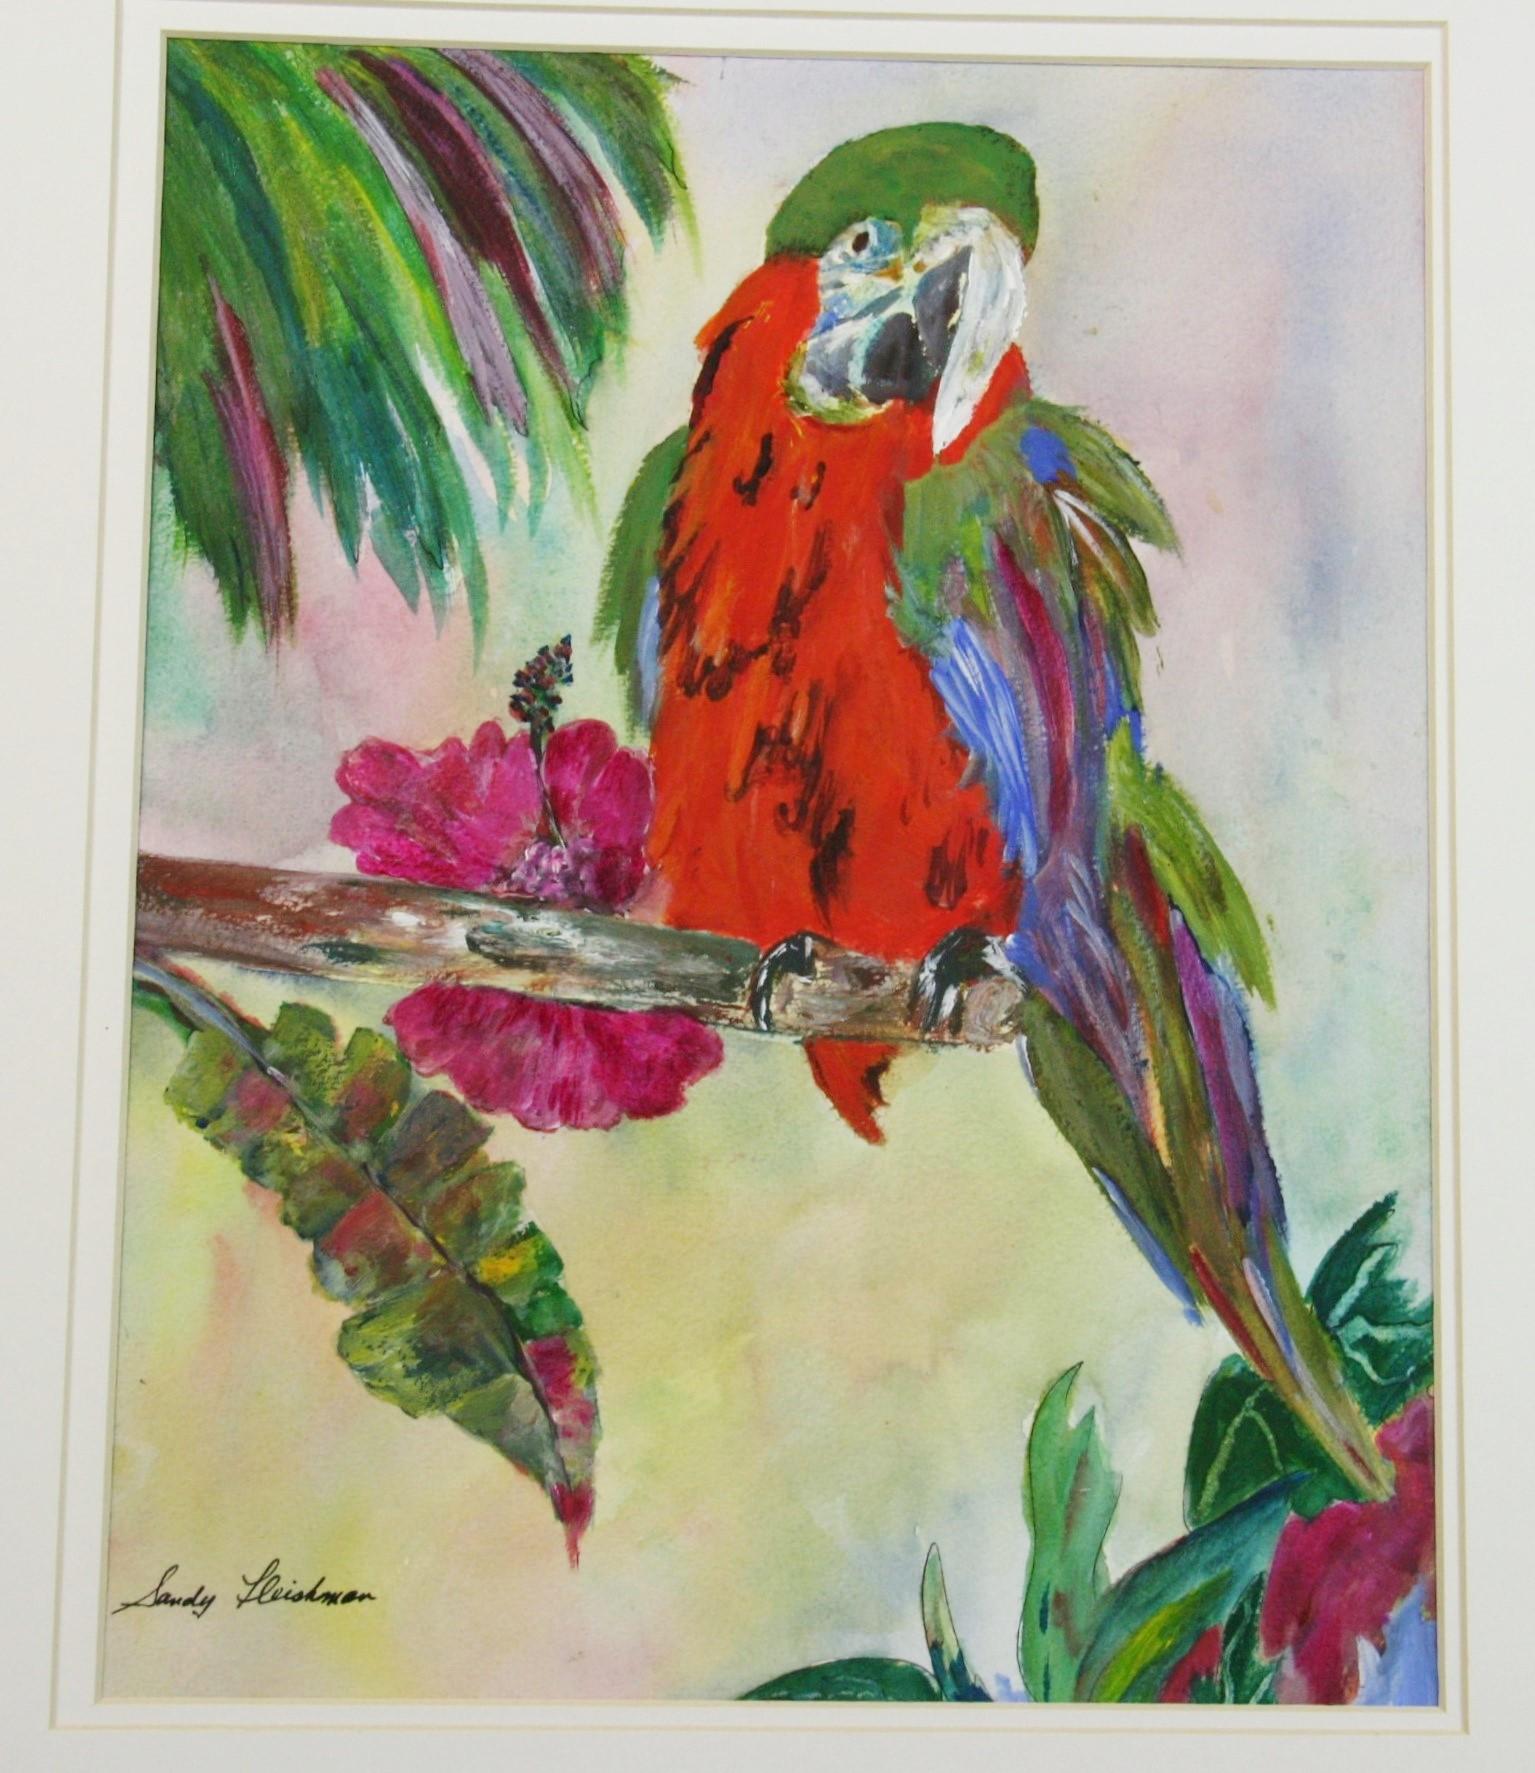 3862 Colorful parrot painting on artist paper set in a mat
Image size 13.5x10.5"